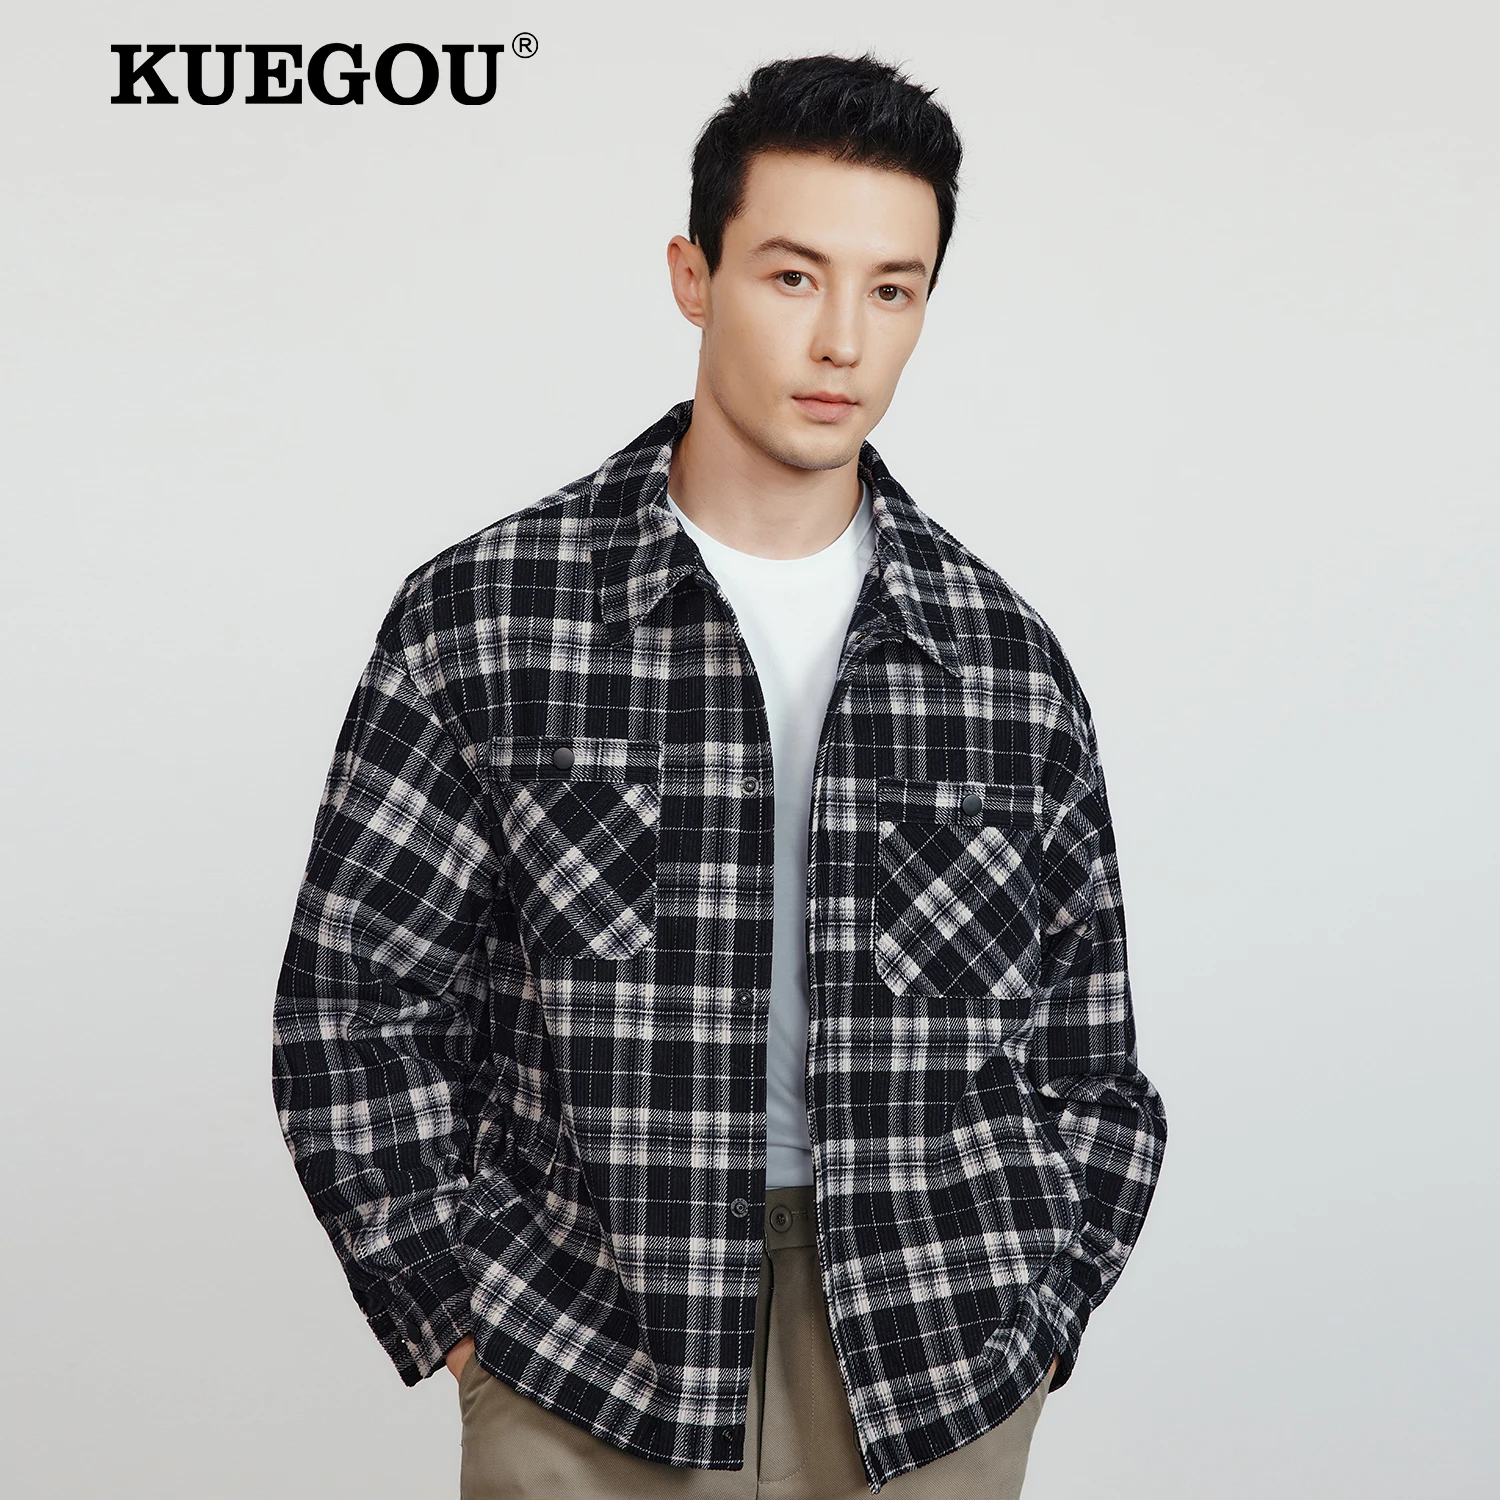 

KUEGOU 2022 Autumn Black Casual Jacket Men And Coats For Outwear New Japanese Streetwear Tactical Military Vintage Clothes 2215